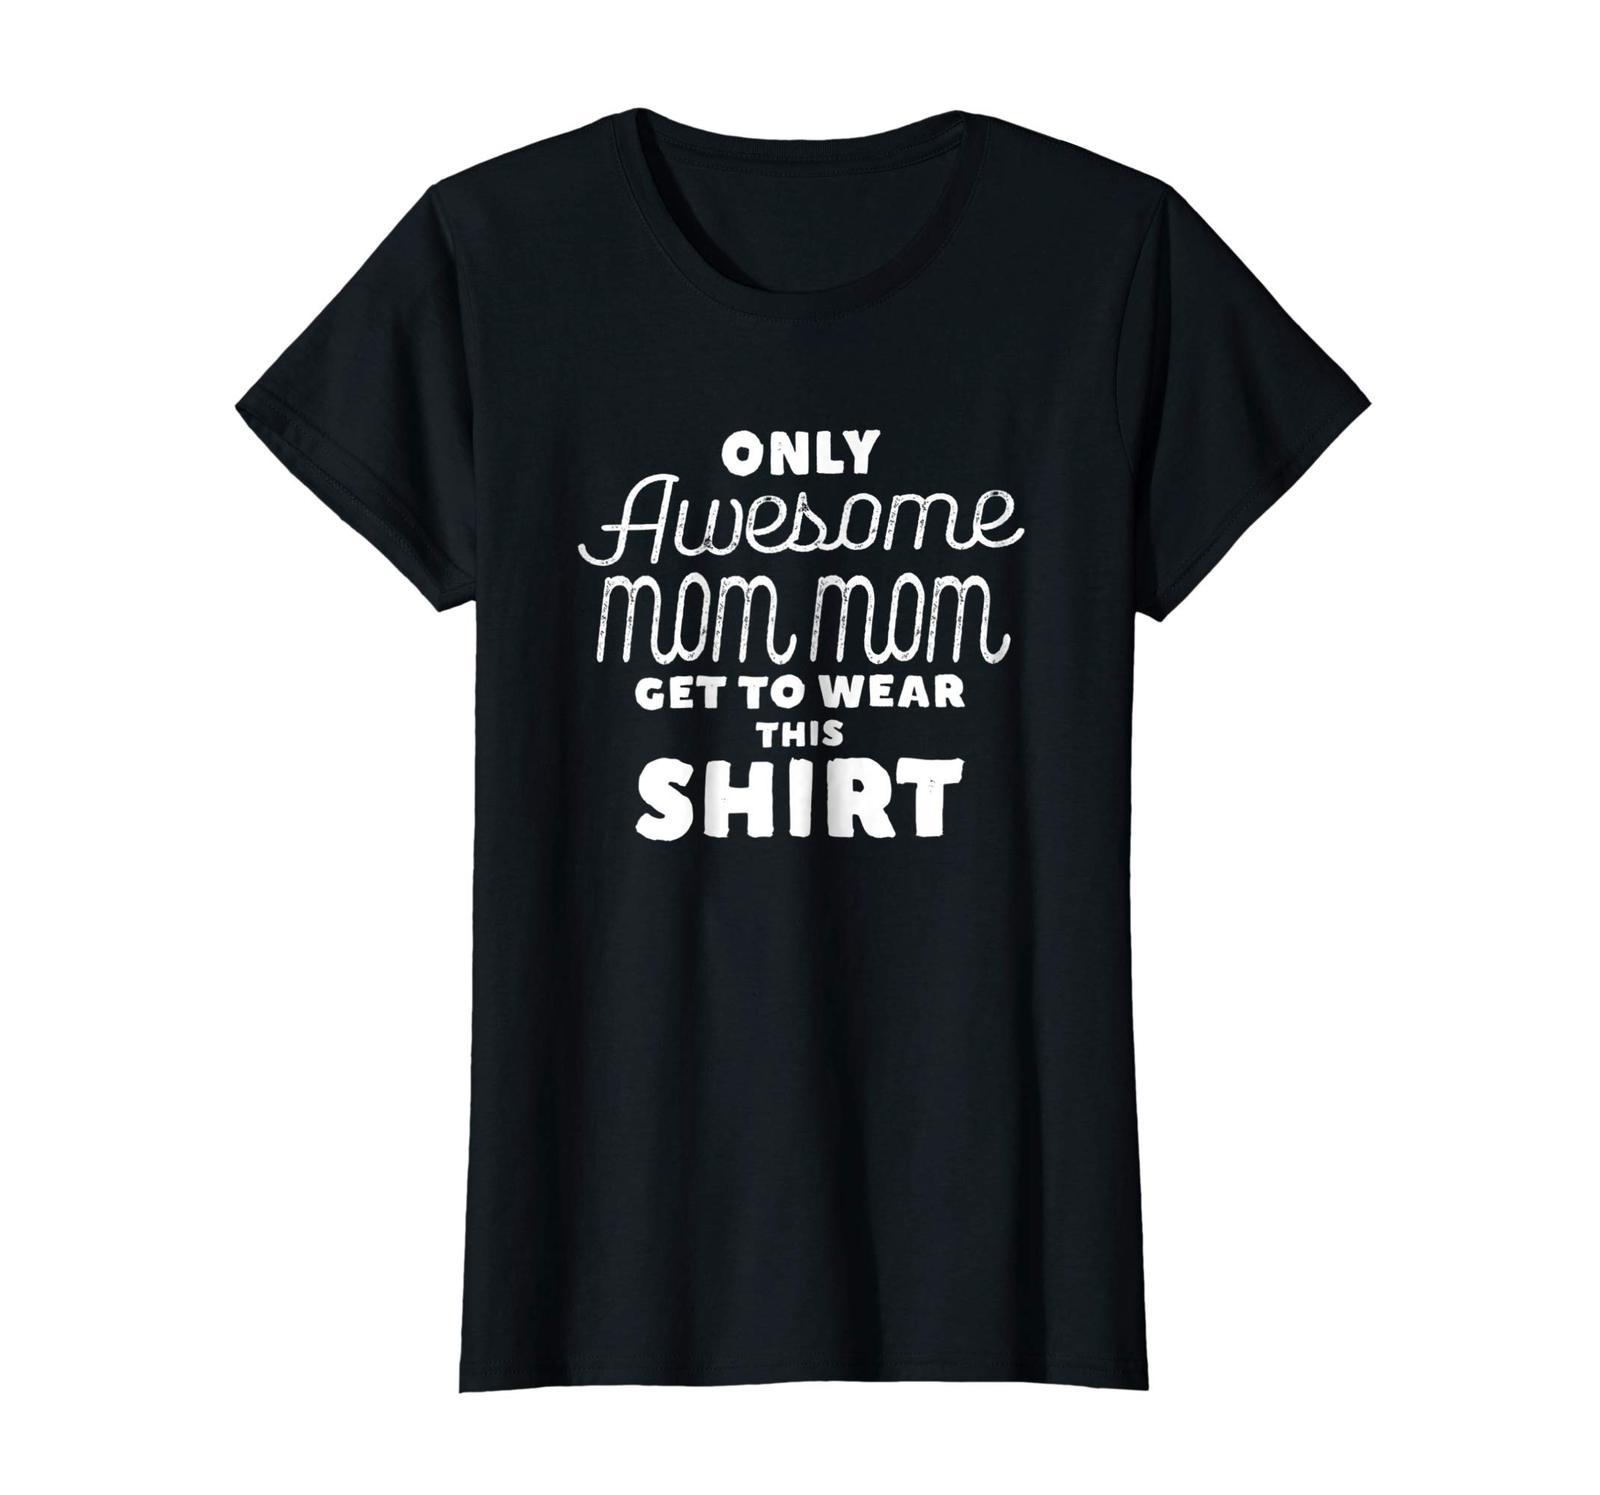 Funny Shirts Only Awesome Mom Mom Get To Wear This Shirt Women Tee